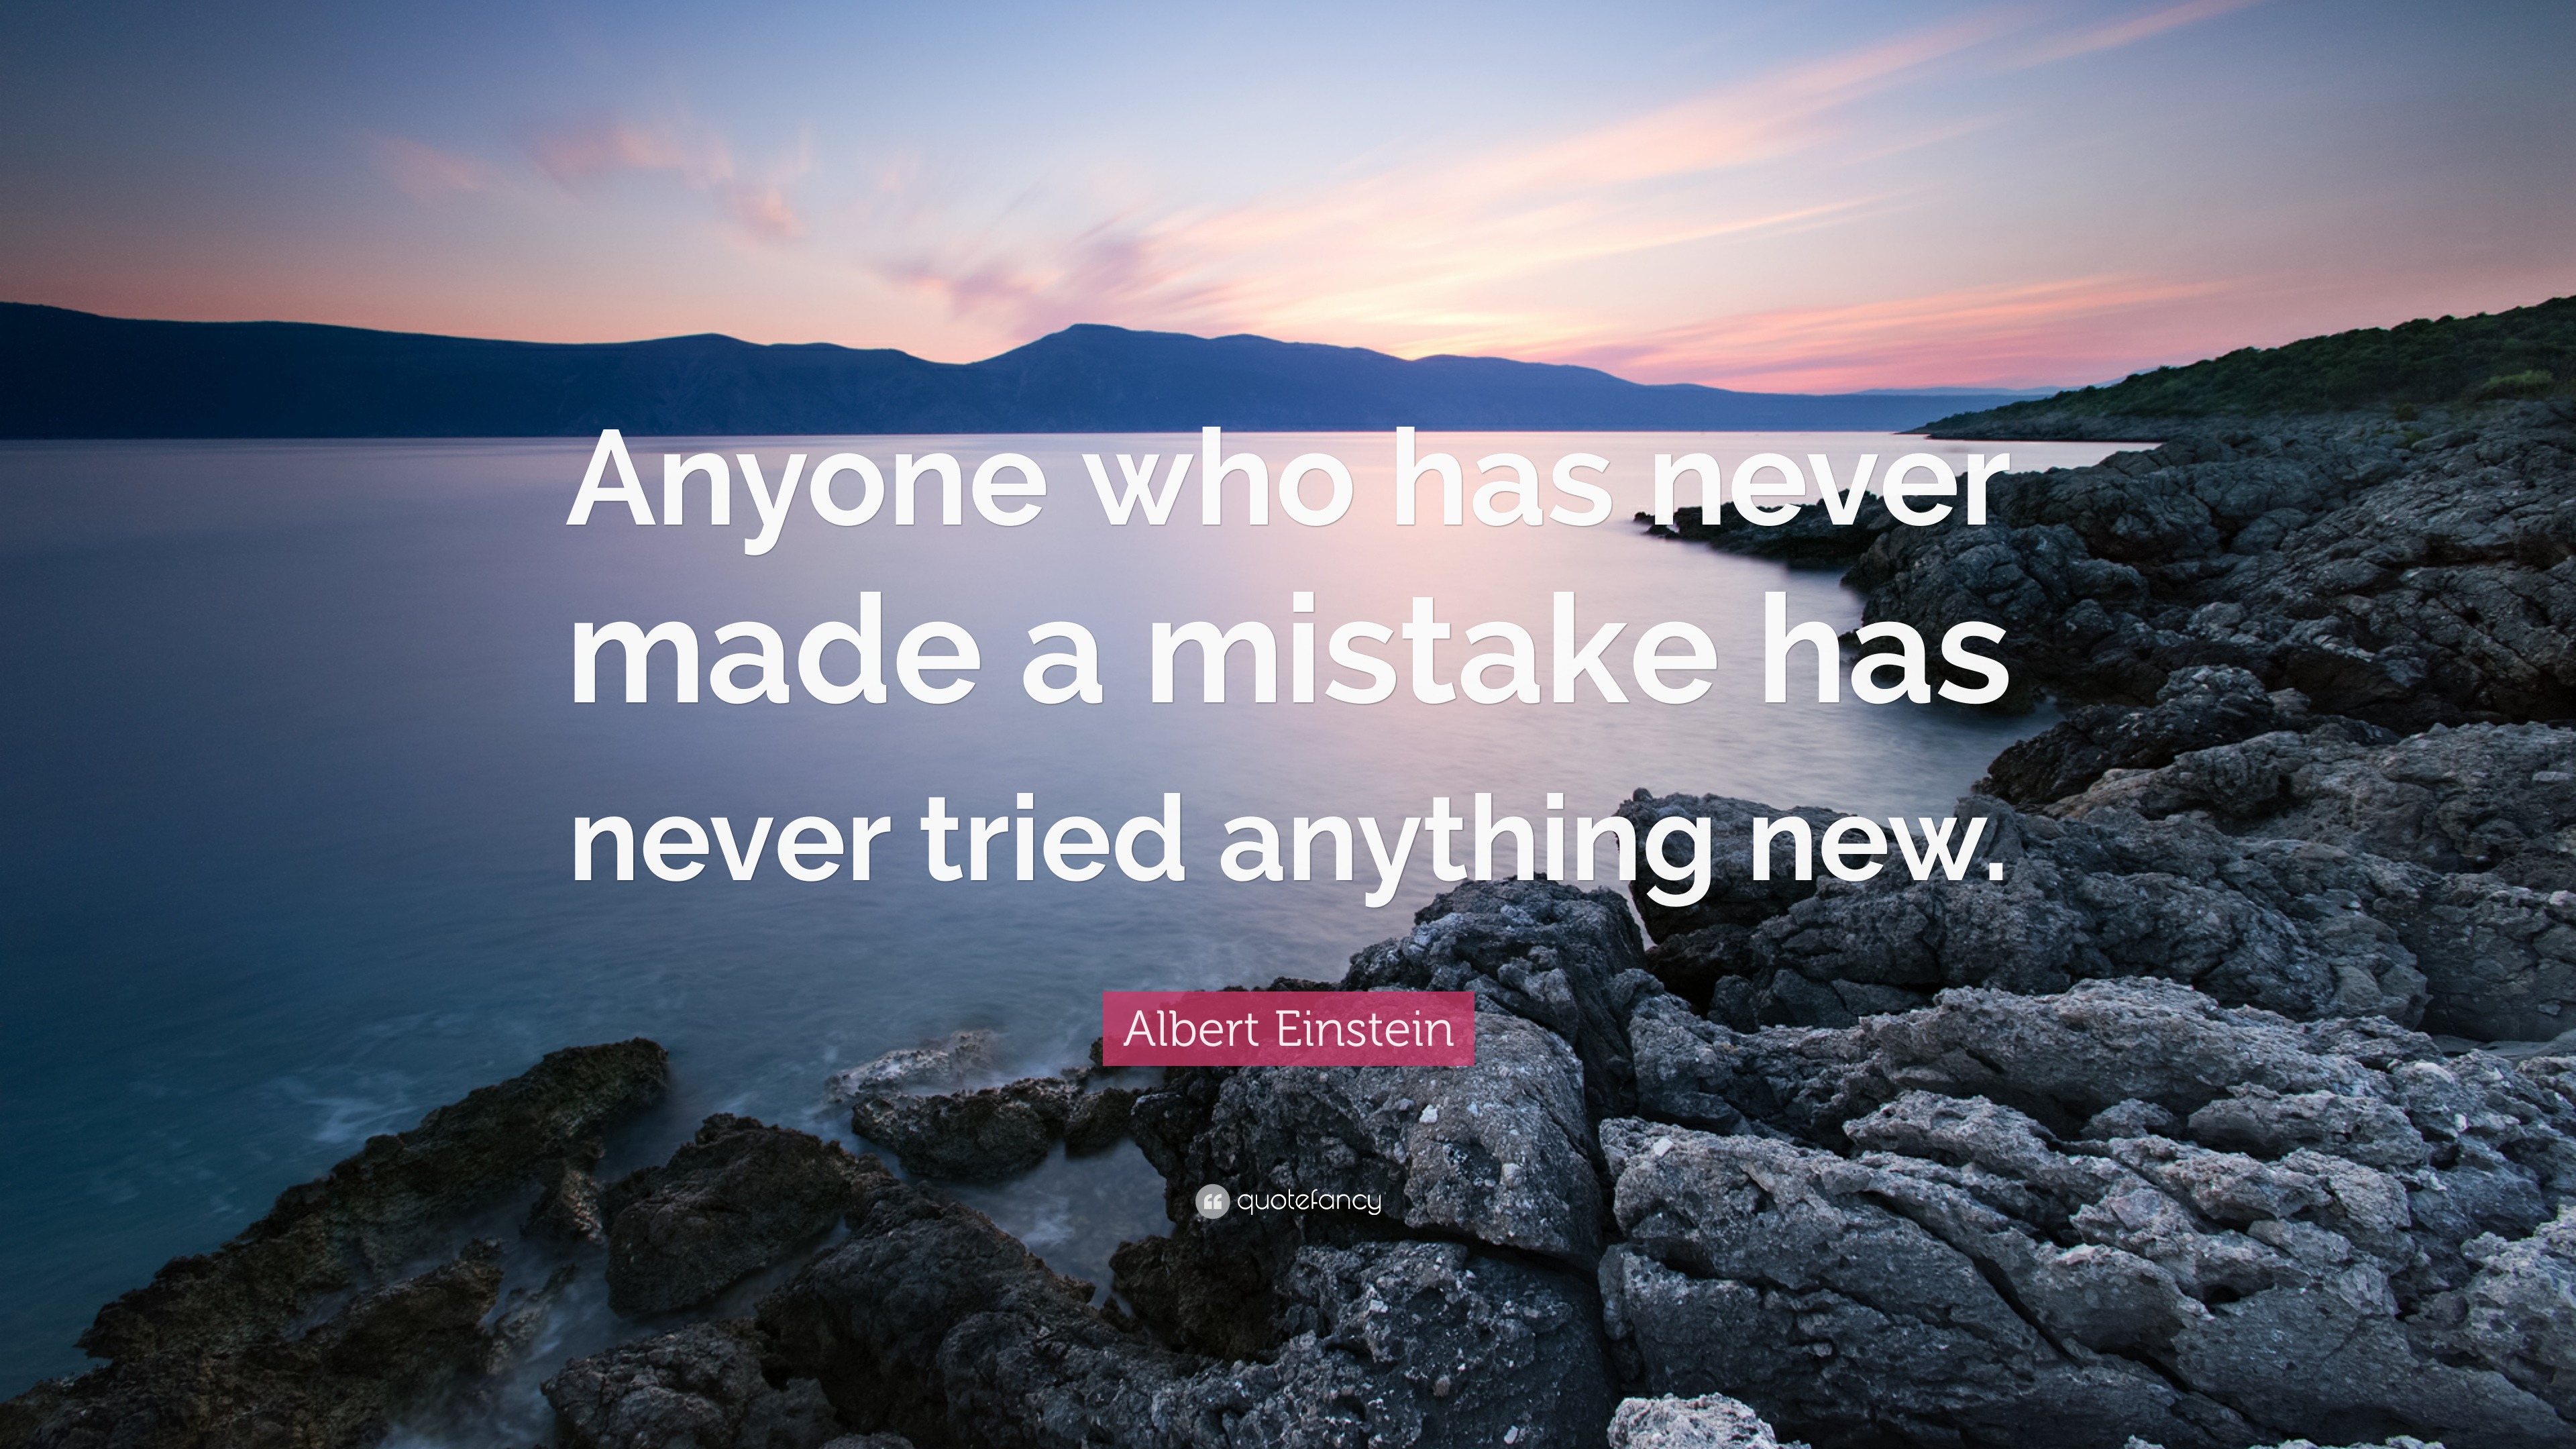 Albert Einstein Quote: “Anyone who has never made a mistake has never